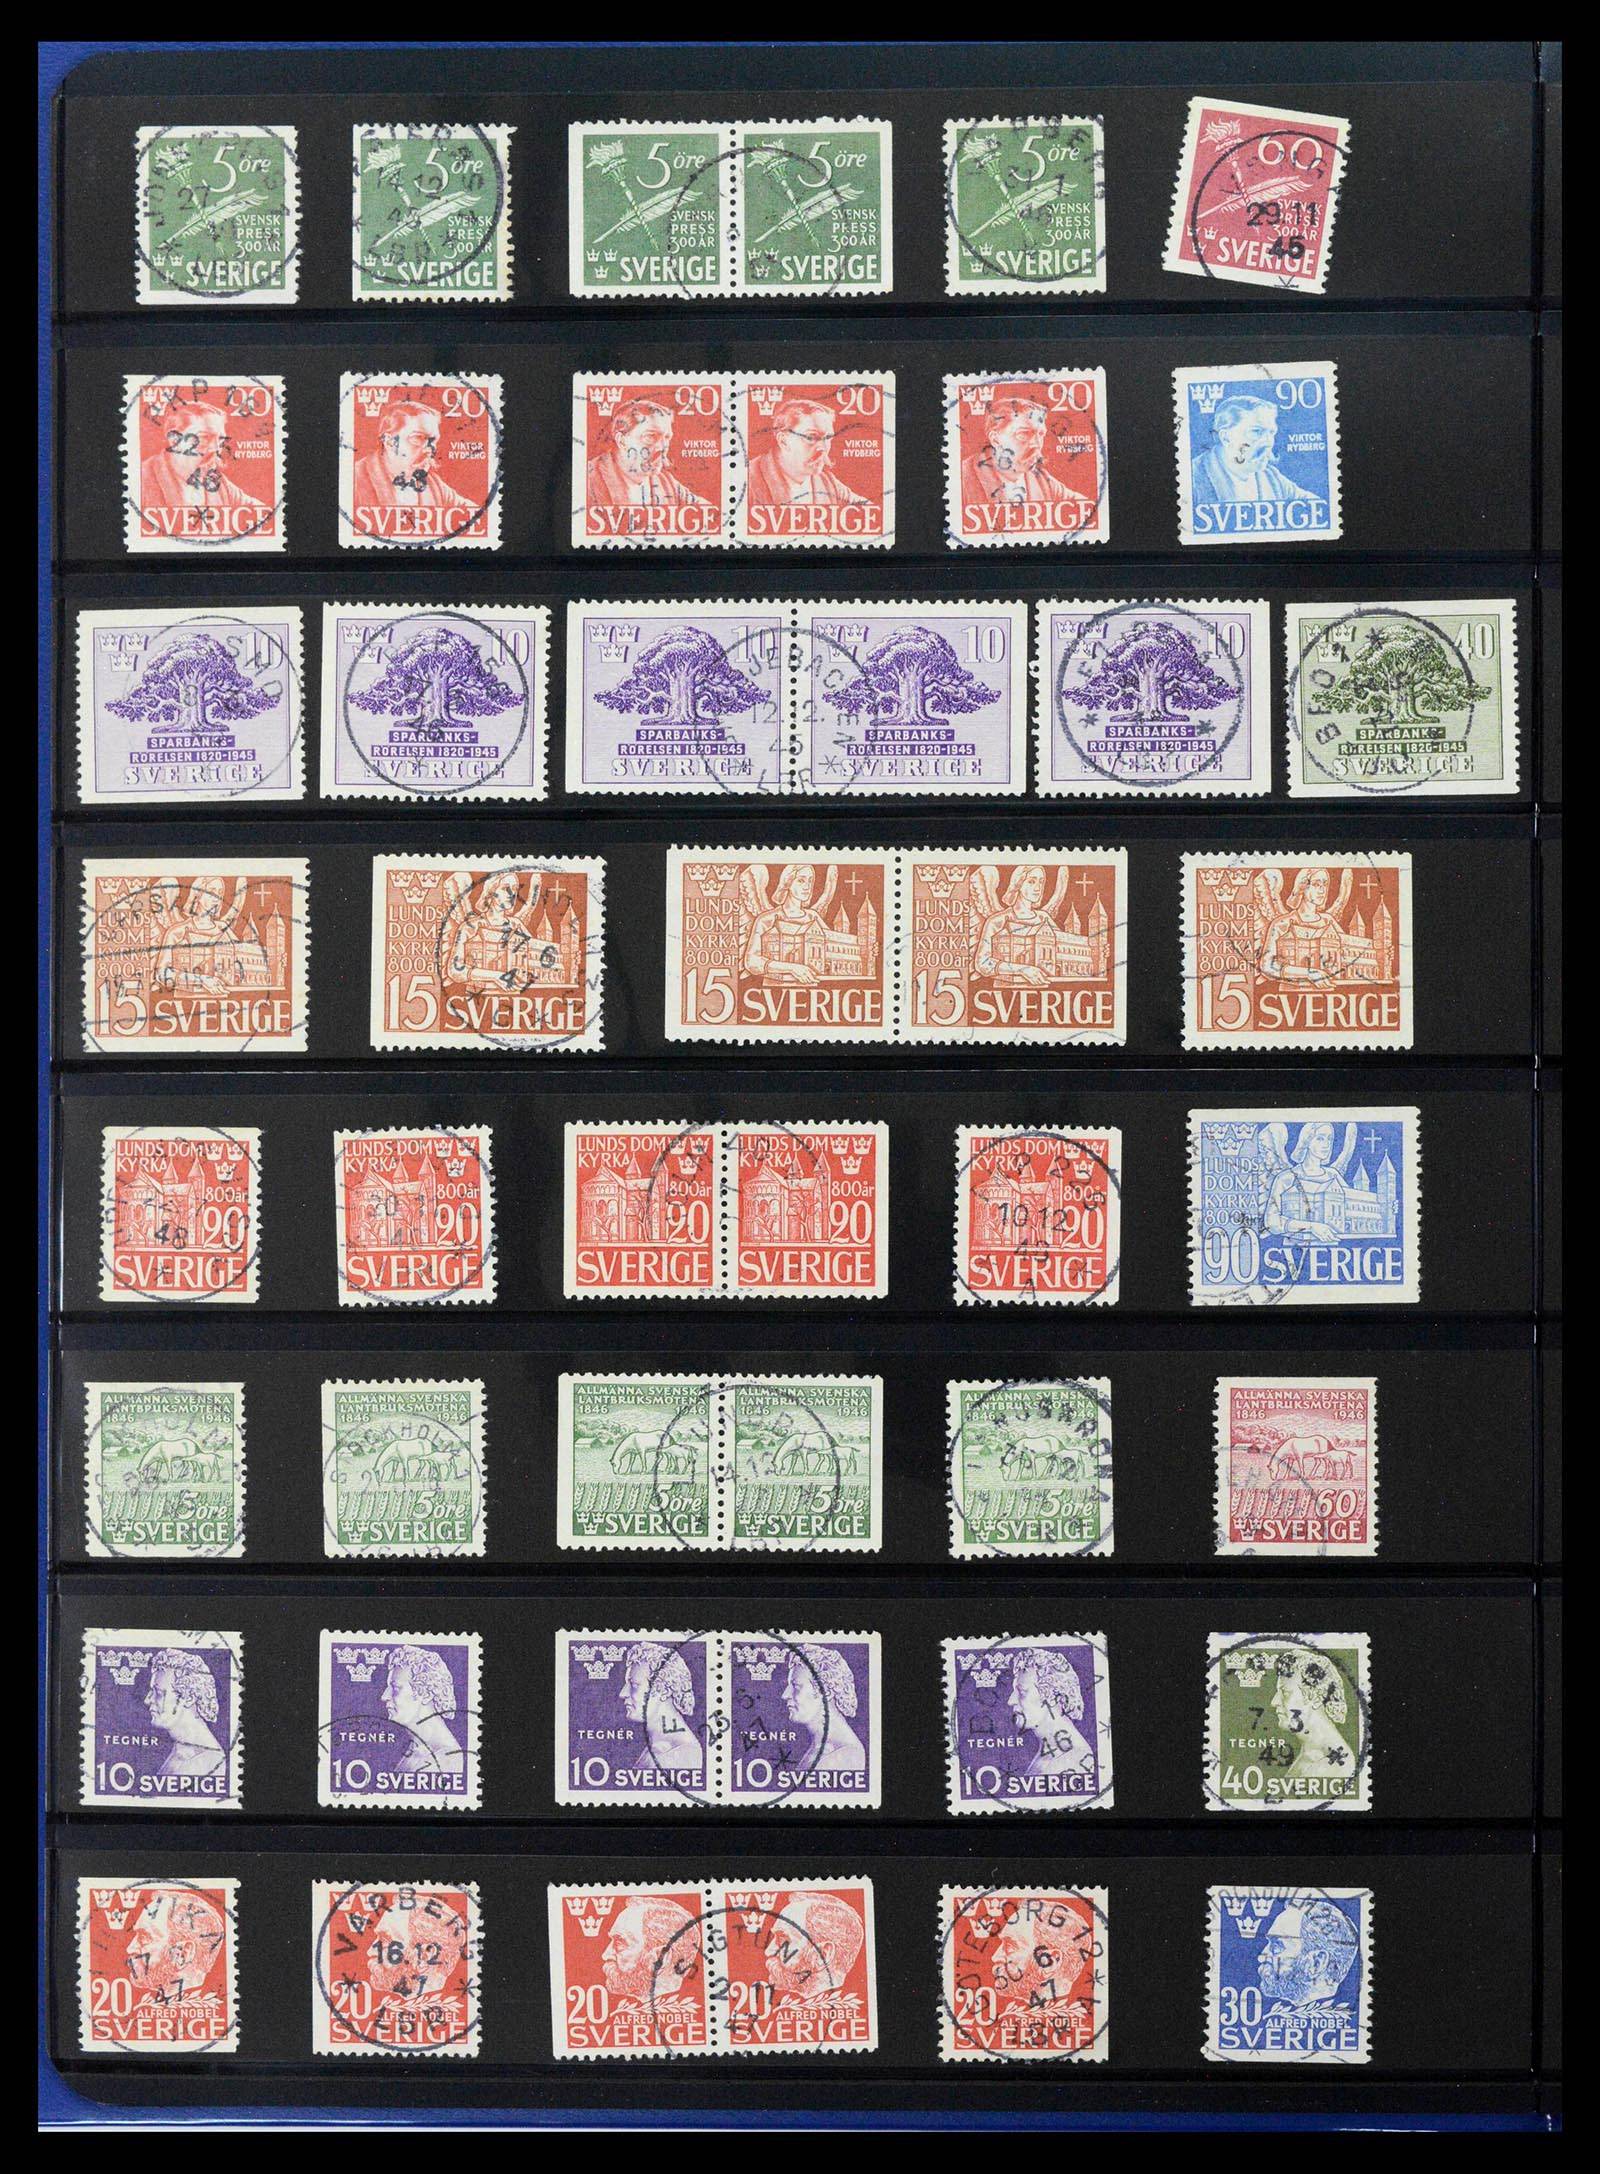 37756 0011 - Stamp collection 37756 Sweden 1858-2002.